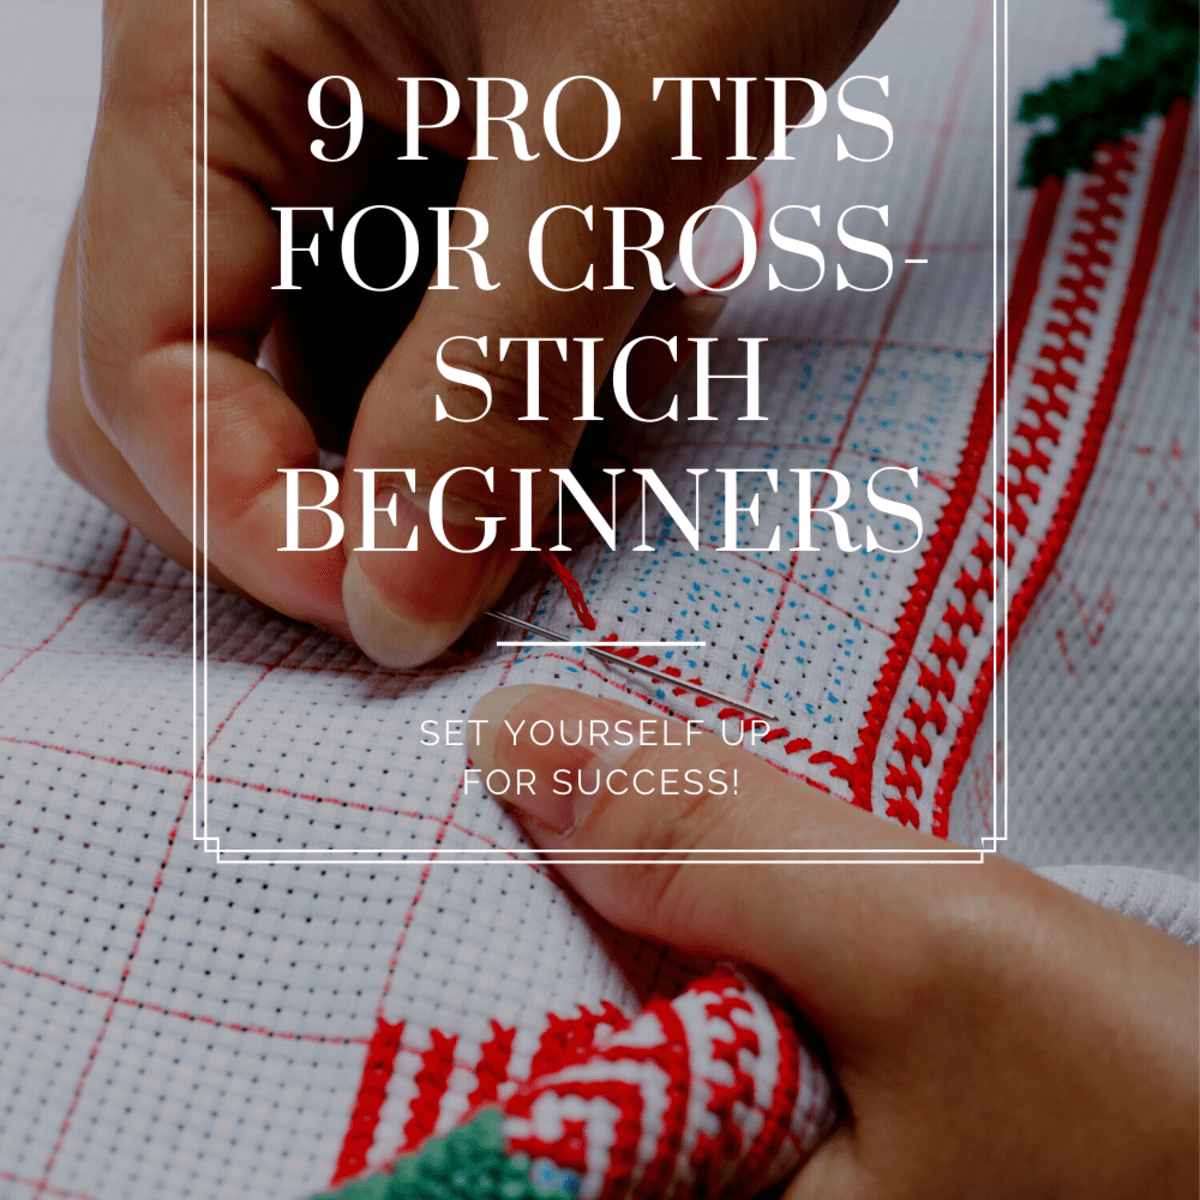 9 Pro Tips for Cross-Stitch Beginners to Set You Up for Success - FeltMagnet